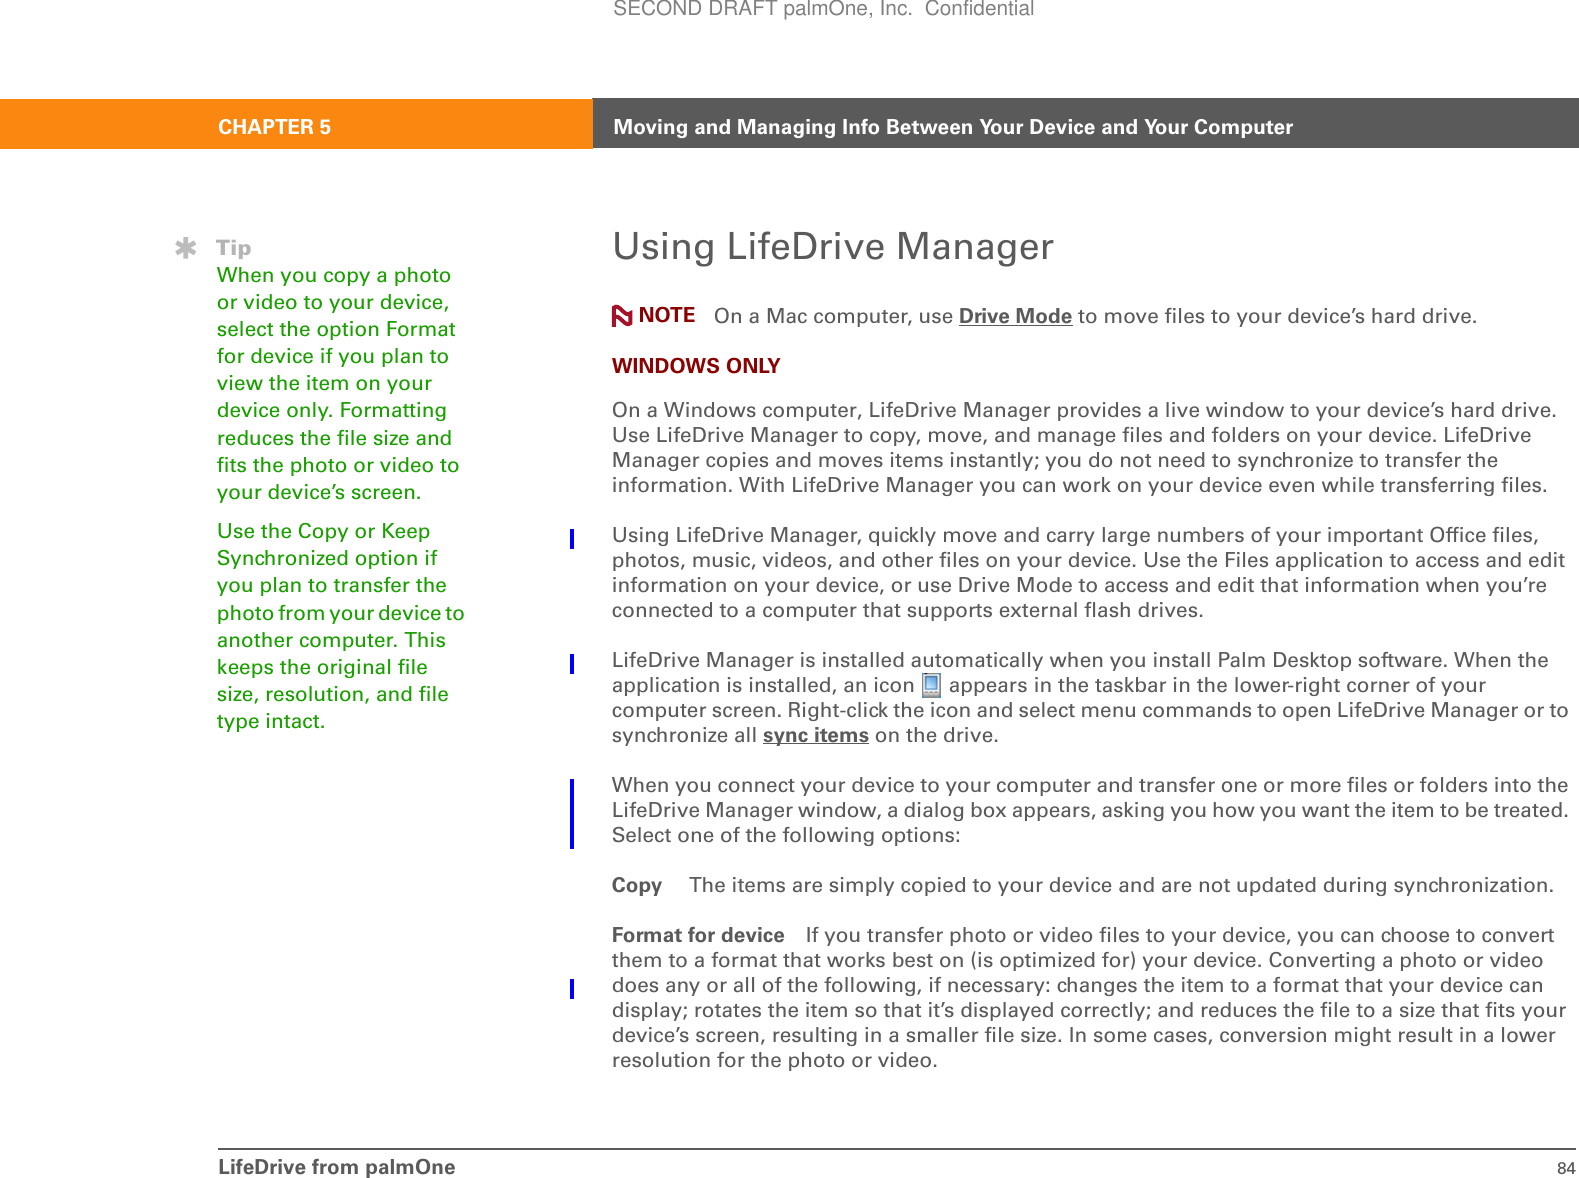 LifeDrive from palmOne 84CHAPTER 5 Moving and Managing Info Between Your Device and Your ComputerUsing LifeDrive Manager On a Mac computer, use Drive Mode to move files to your device’s hard drive.WINDOWS ONLYOn a Windows computer, LifeDrive Manager provides a live window to your device’s hard drive. Use LifeDrive Manager to copy, move, and manage files and folders on your device. LifeDrive Manager copies and moves items instantly; you do not need to synchronize to transfer the information. With LifeDrive Manager you can work on your device even while transferring files. Using LifeDrive Manager, quickly move and carry large numbers of your important Office files, photos, music, videos, and other files on your device. Use the Files application to access and edit information on your device, or use Drive Mode to access and edit that information when you’re connected to a computer that supports external flash drives. LifeDrive Manager is installed automatically when you install Palm Desktop software. When the application is installed, an icon   appears in the taskbar in the lower-right corner of your computer screen. Right-click the icon and select menu commands to open LifeDrive Manager or to synchronize all sync items on the drive.When you connect your device to your computer and transfer one or more files or folders into the LifeDrive Manager window, a dialog box appears, asking you how you want the item to be treated. Select one of the following options:Copy  The items are simply copied to your device and are not updated during synchronization.Format for device If you transfer photo or video files to your device, you can choose to convert them to a format that works best on (is optimized for) your device. Converting a photo or video does any or all of the following, if necessary: changes the item to a format that your device can display; rotates the item so that it’s displayed correctly; and reduces the file to a size that fits your device’s screen, resulting in a smaller file size. In some cases, conversion might result in a lower resolution for the photo or video. TipWhen you copy a photo or video to your device, select the option Format for device if you plan to view the item on your device only. Formatting reduces the file size and fits the photo or video to your device’s screen. Use the Copy or Keep Synchronized option if you plan to transfer the photo from your device to another computer. This keeps the original file size, resolution, and file type intact.NOTESECOND DRAFT palmOne, Inc.  Confidential